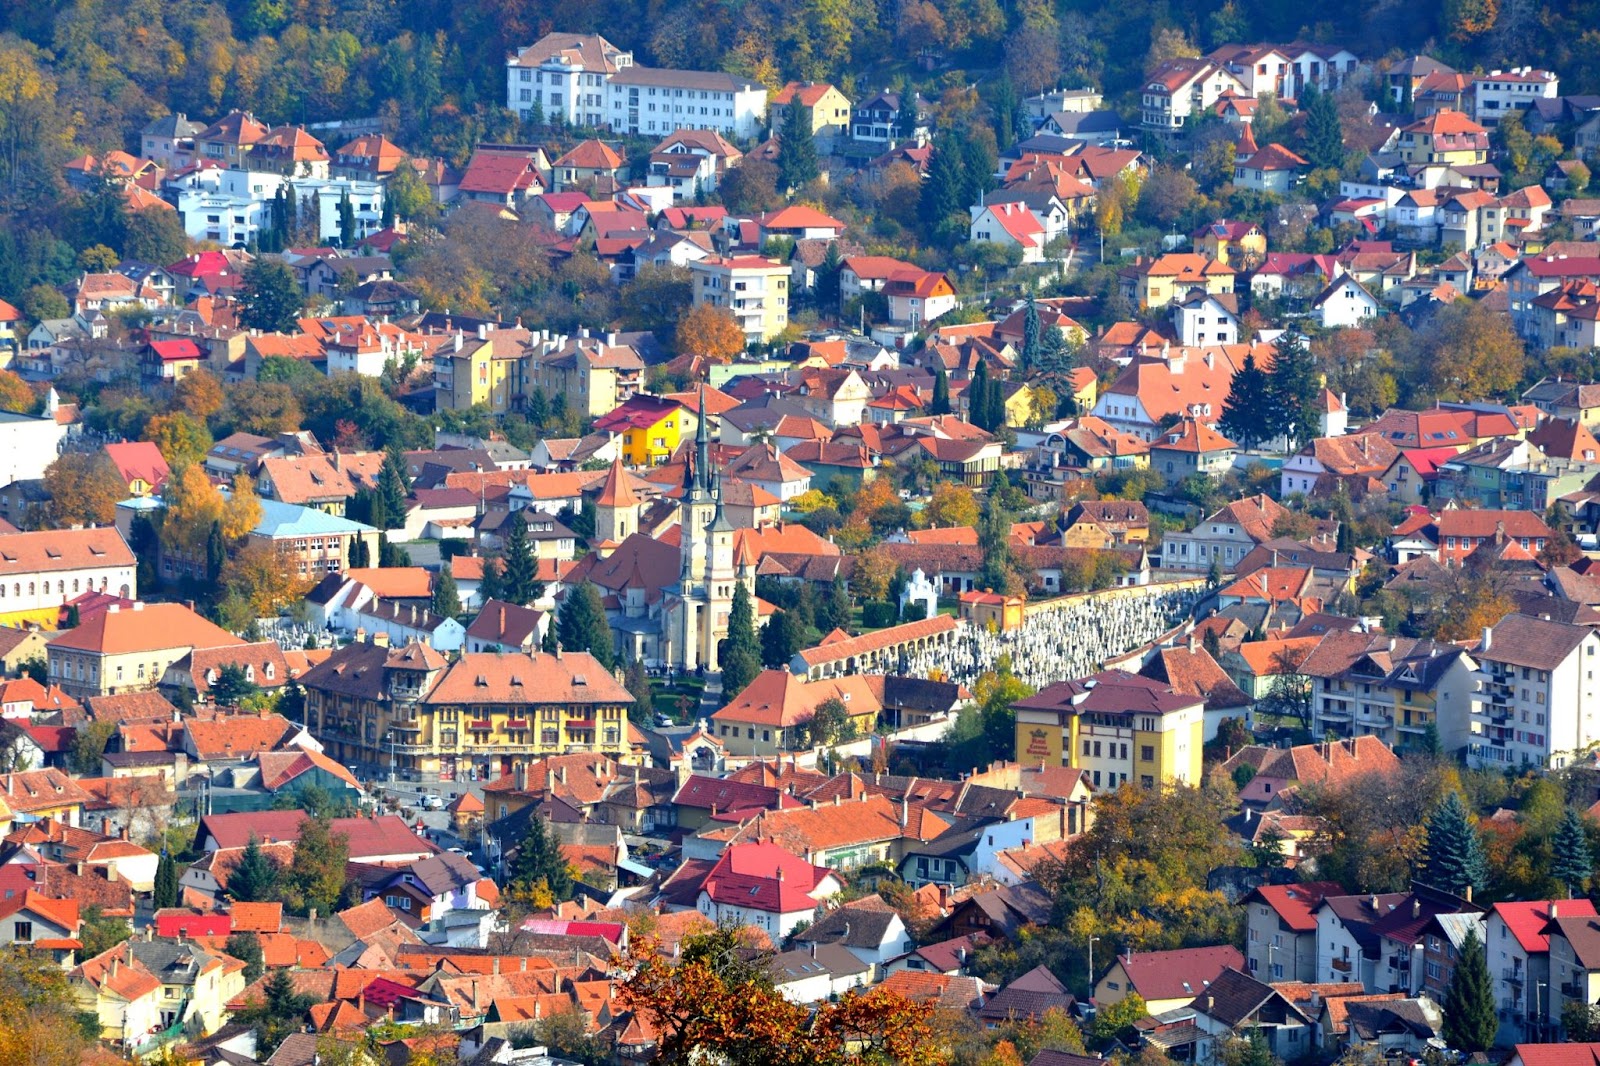 Typical urban landscape of the city Brasov, a town situated in Transylvania, Romania, in the center of the country. 300.000 inhabitants